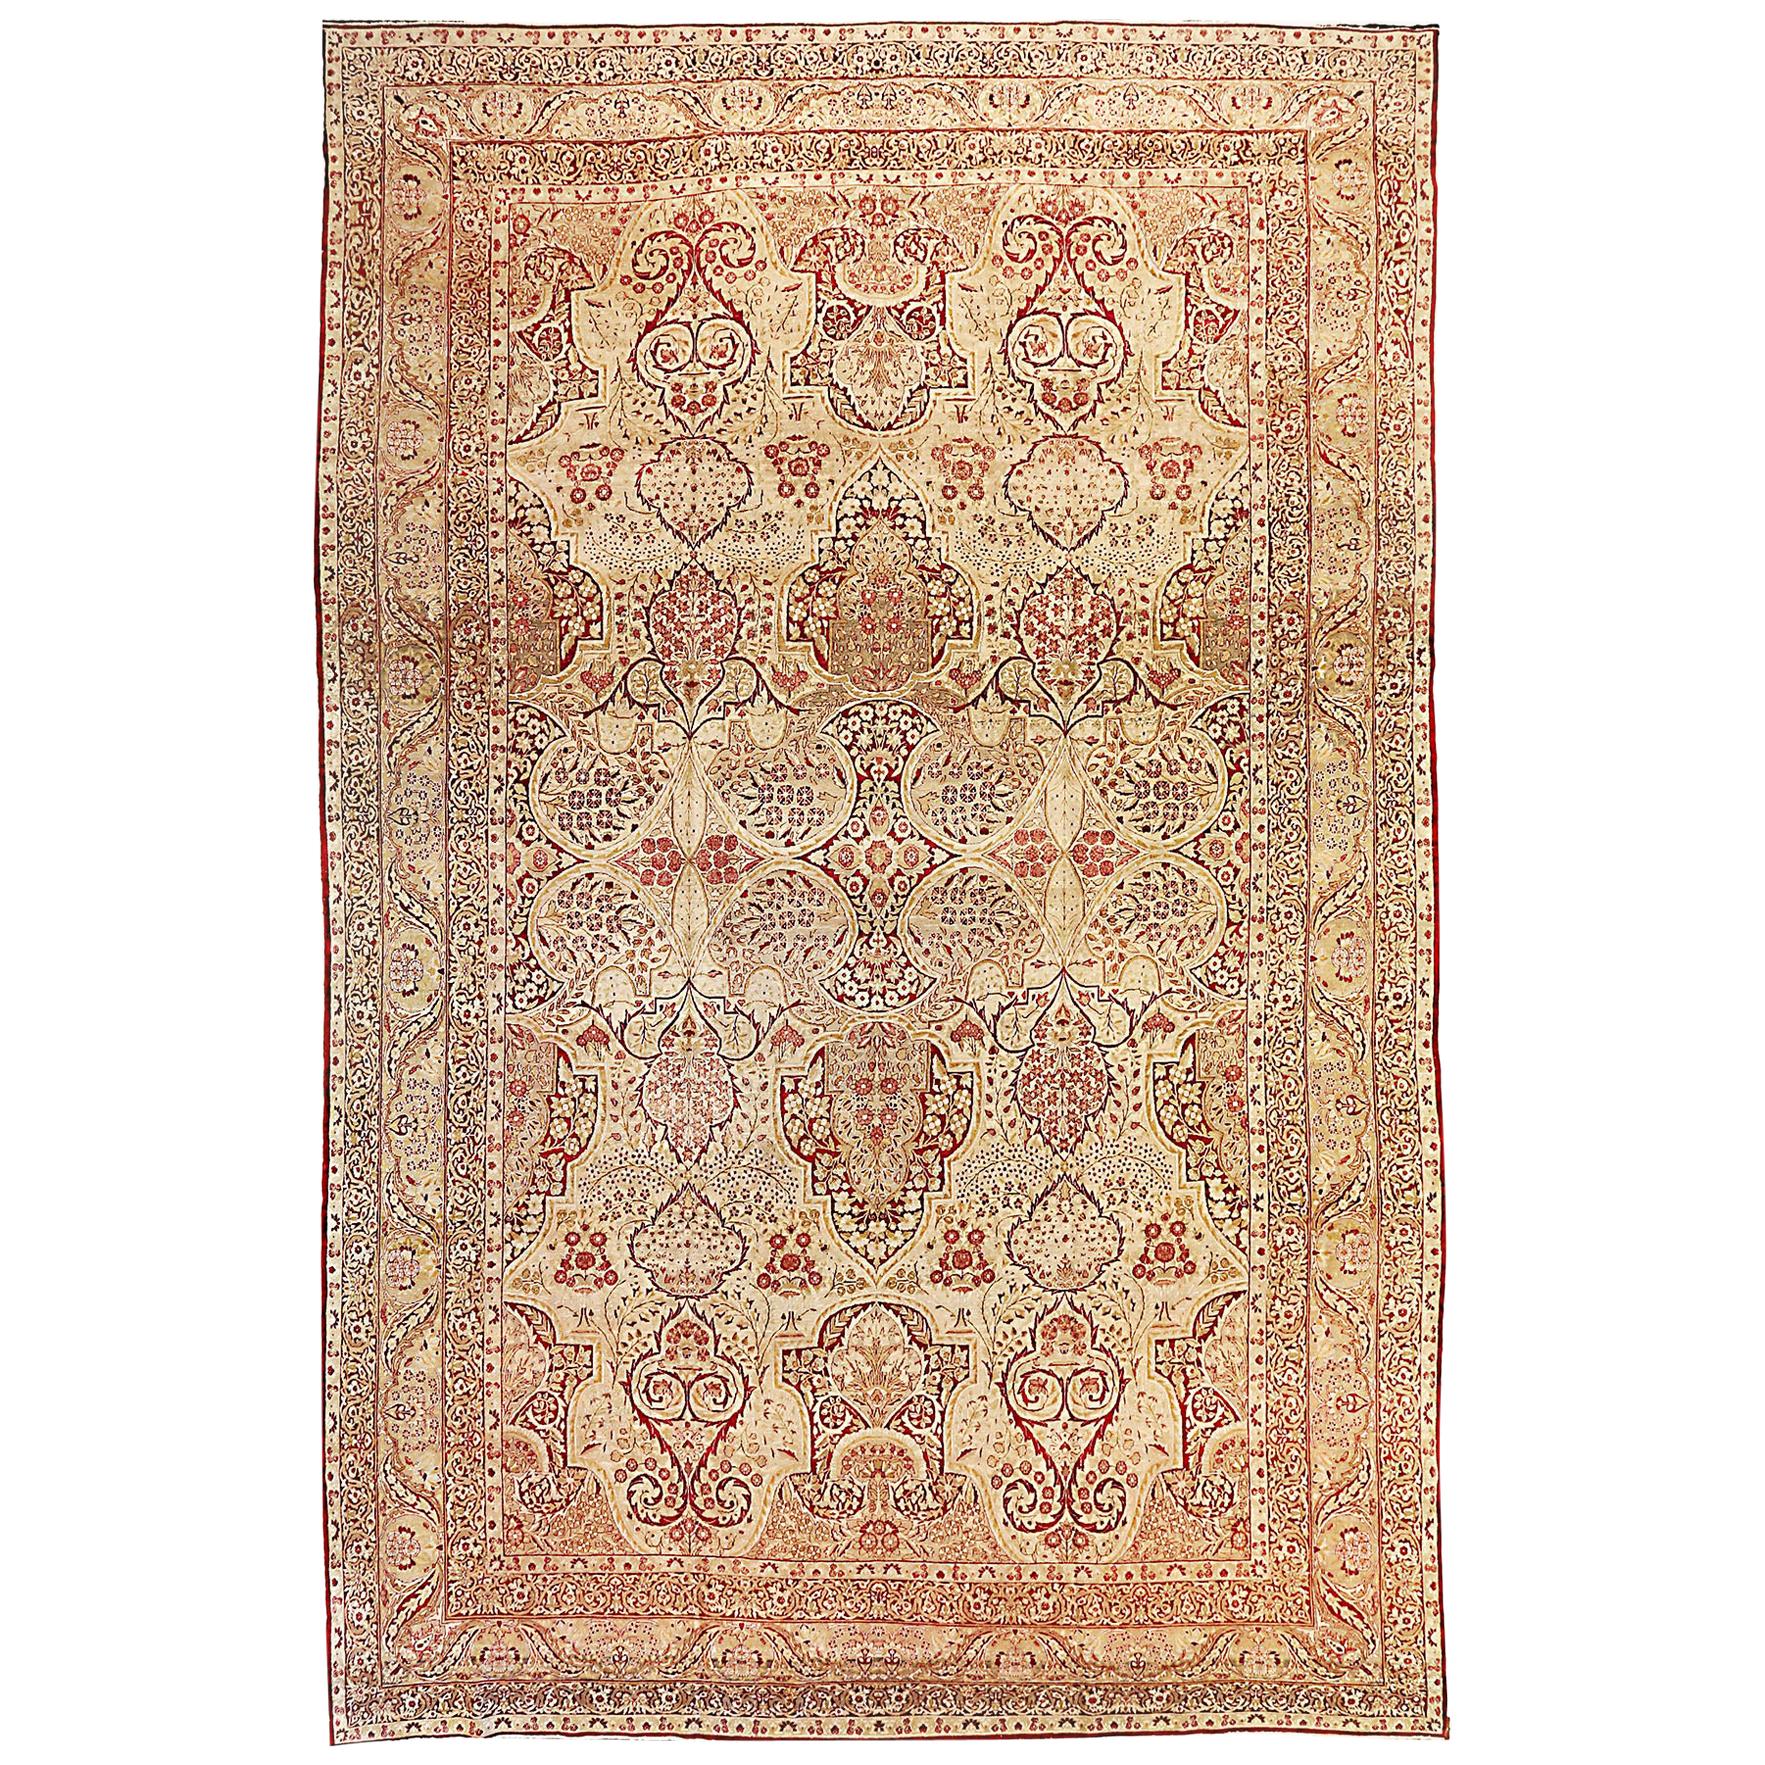 Rare 1920s Antique Persian Yazd Rug with Intricate Floral Details in Red